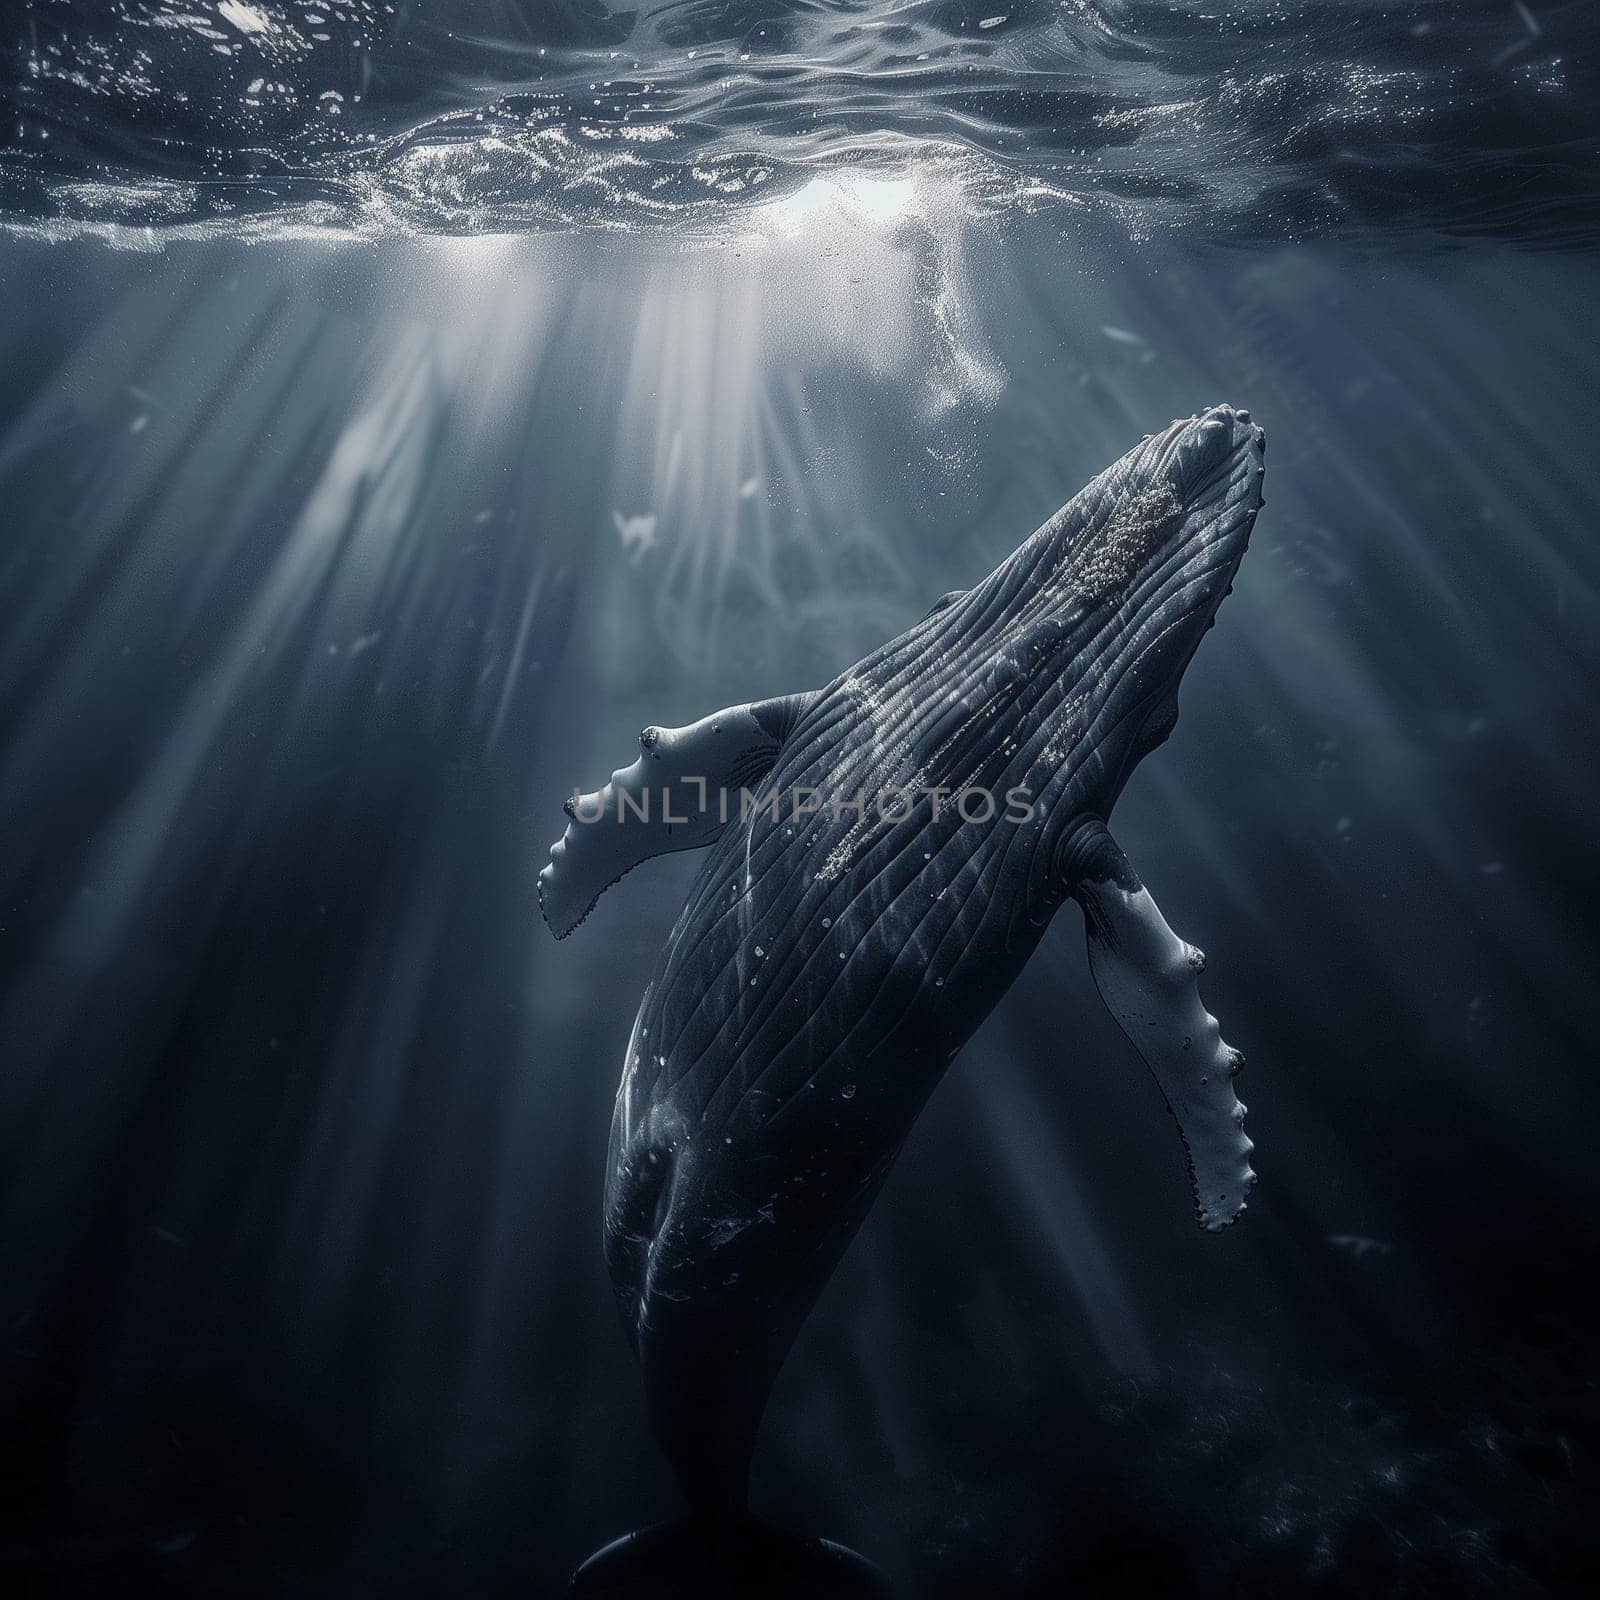 A stunningly beautiful whale in the ocean at sunset by NeuroSky